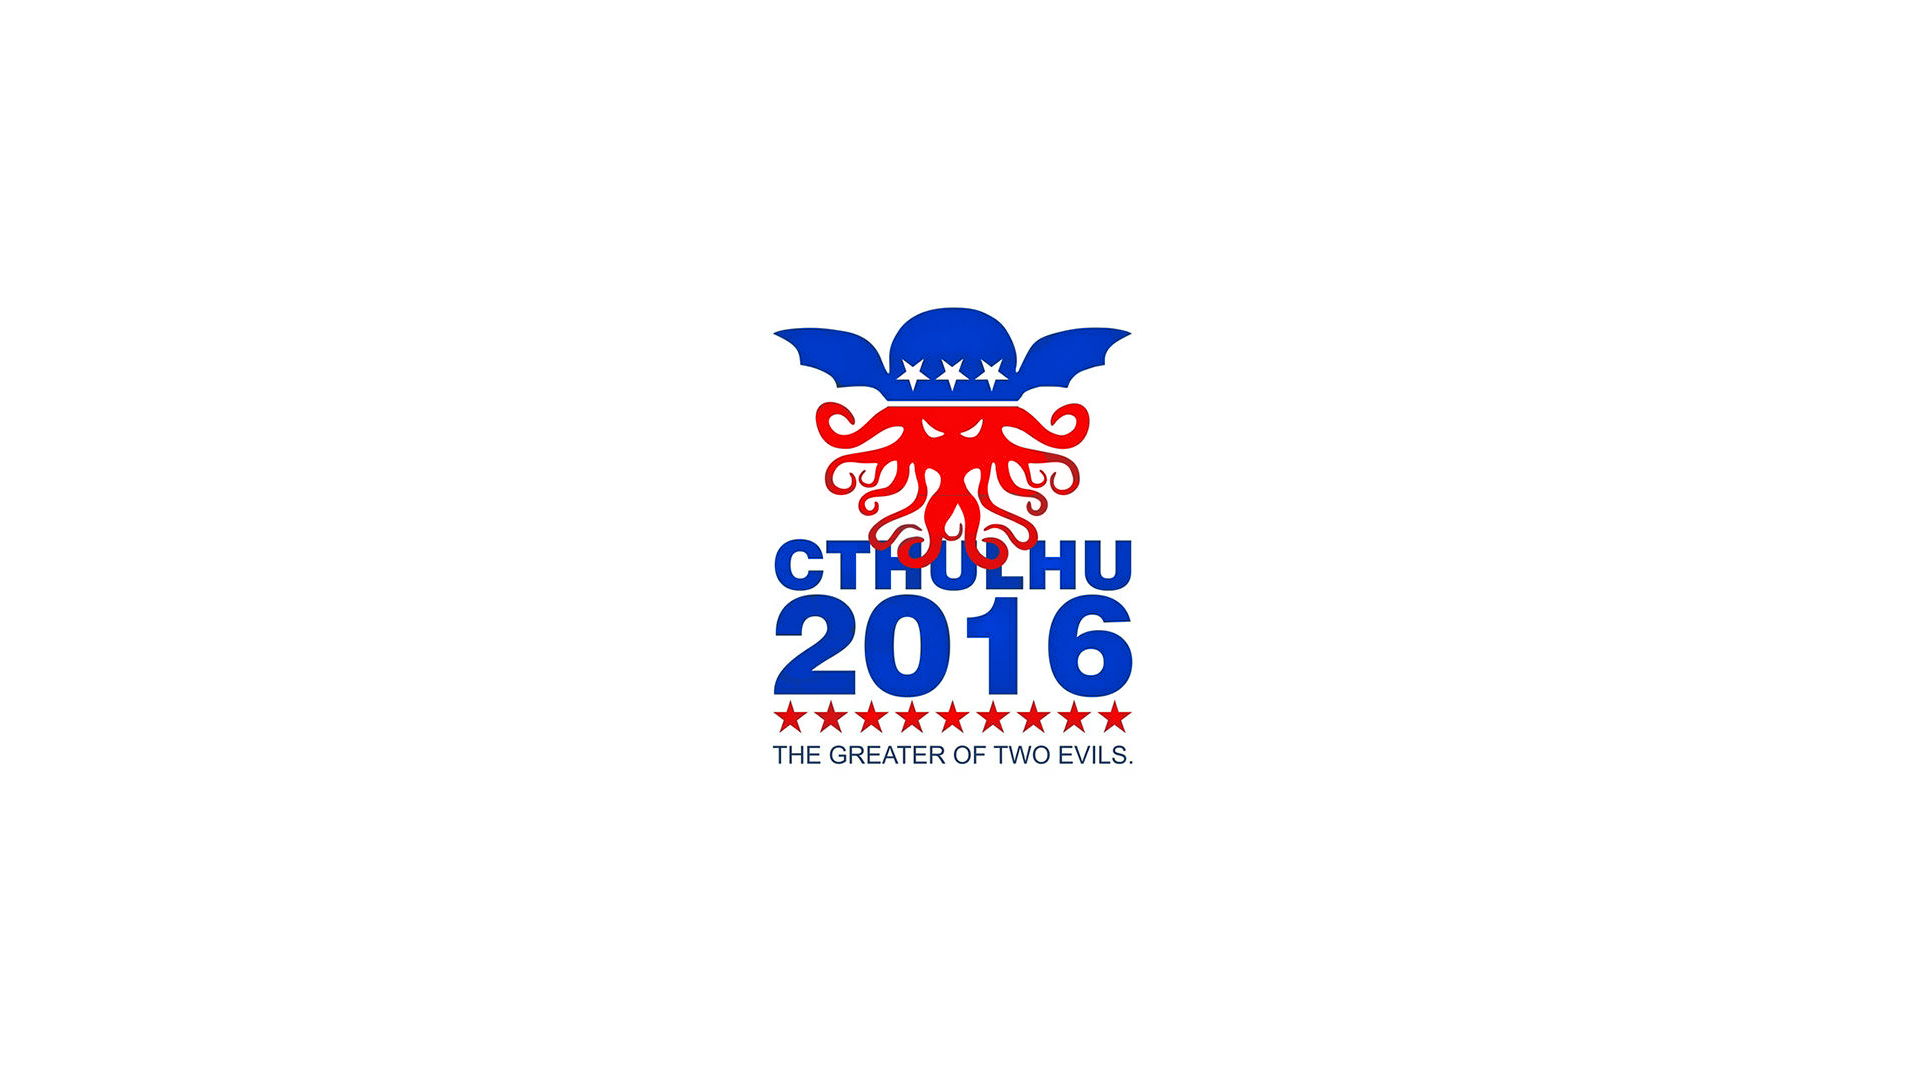 General 1920x1080 Cthulhu logo 2016 (year) minimalism simple background white background Book characters